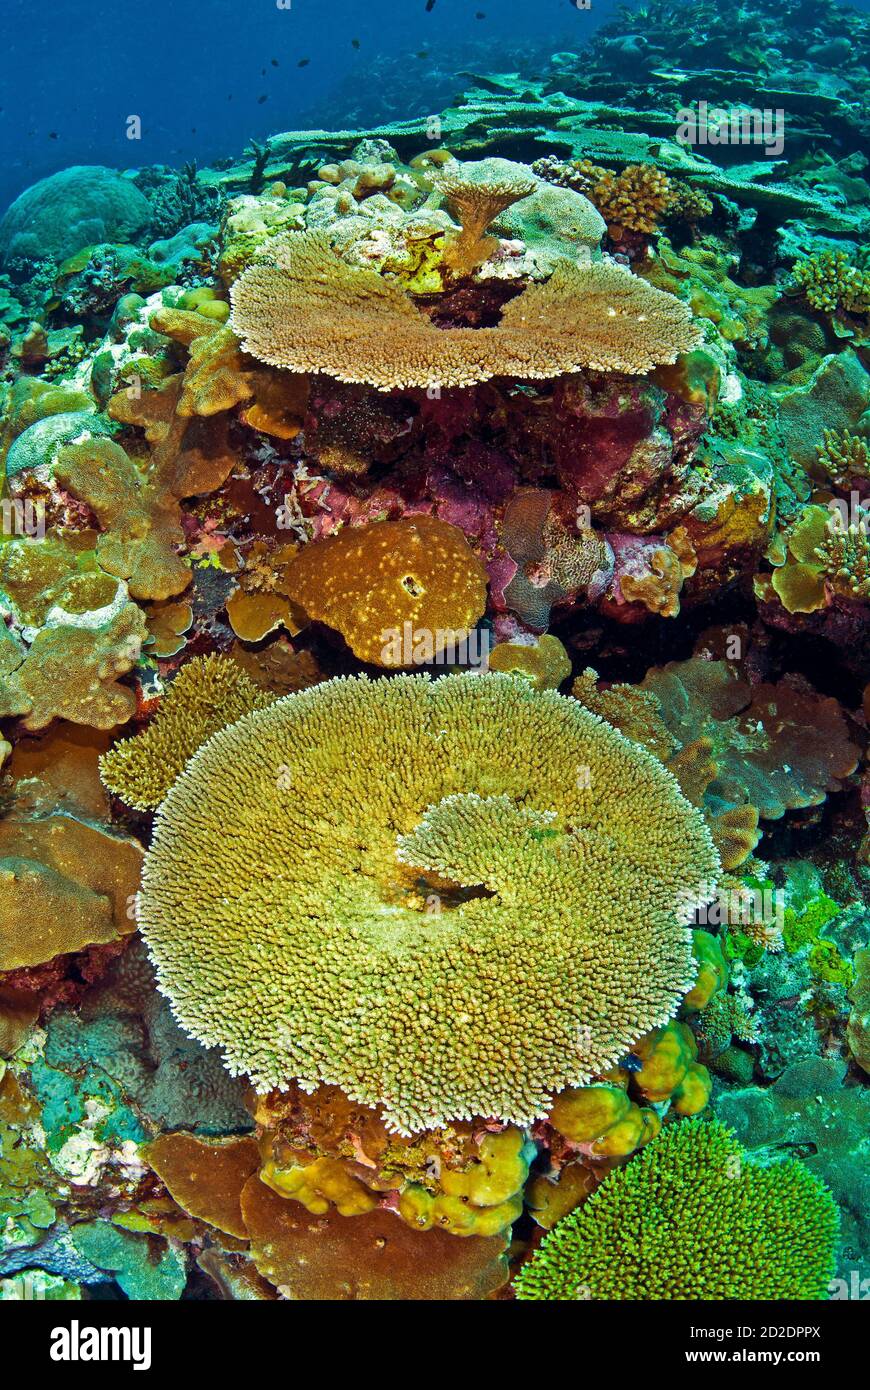 Acropora Millepora and other hard corals on healthy coral reef Stock Photo